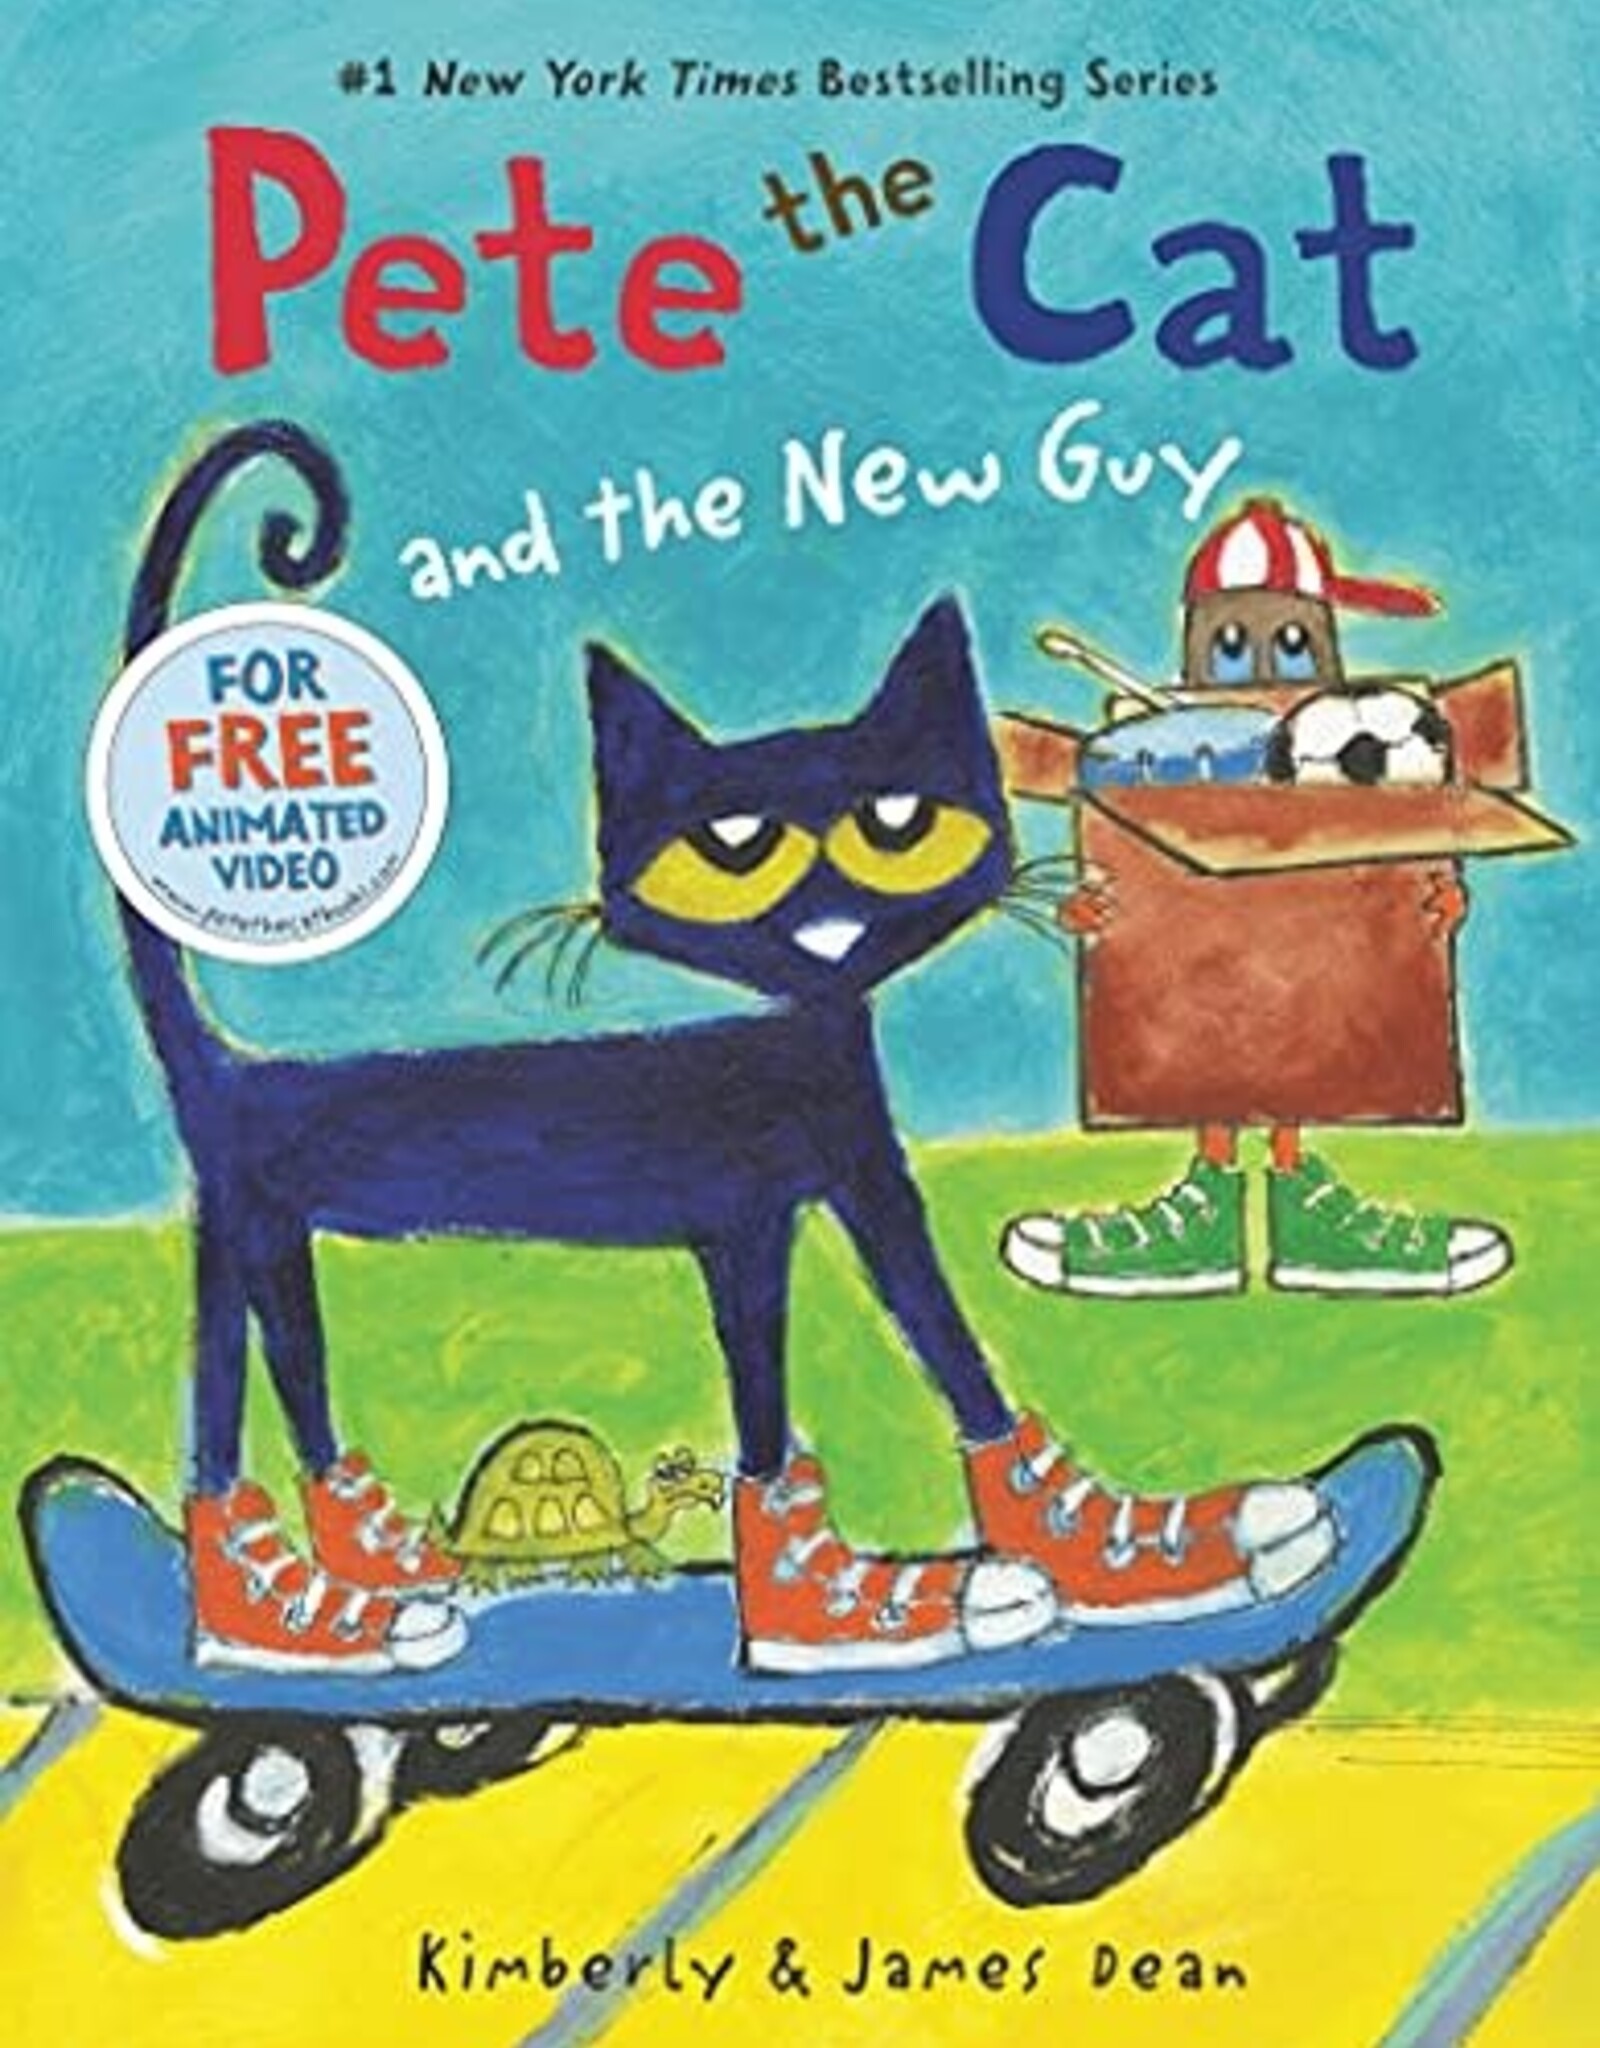 BOOK PUBLISHERS PETE THE CAT & THE NEW GUY